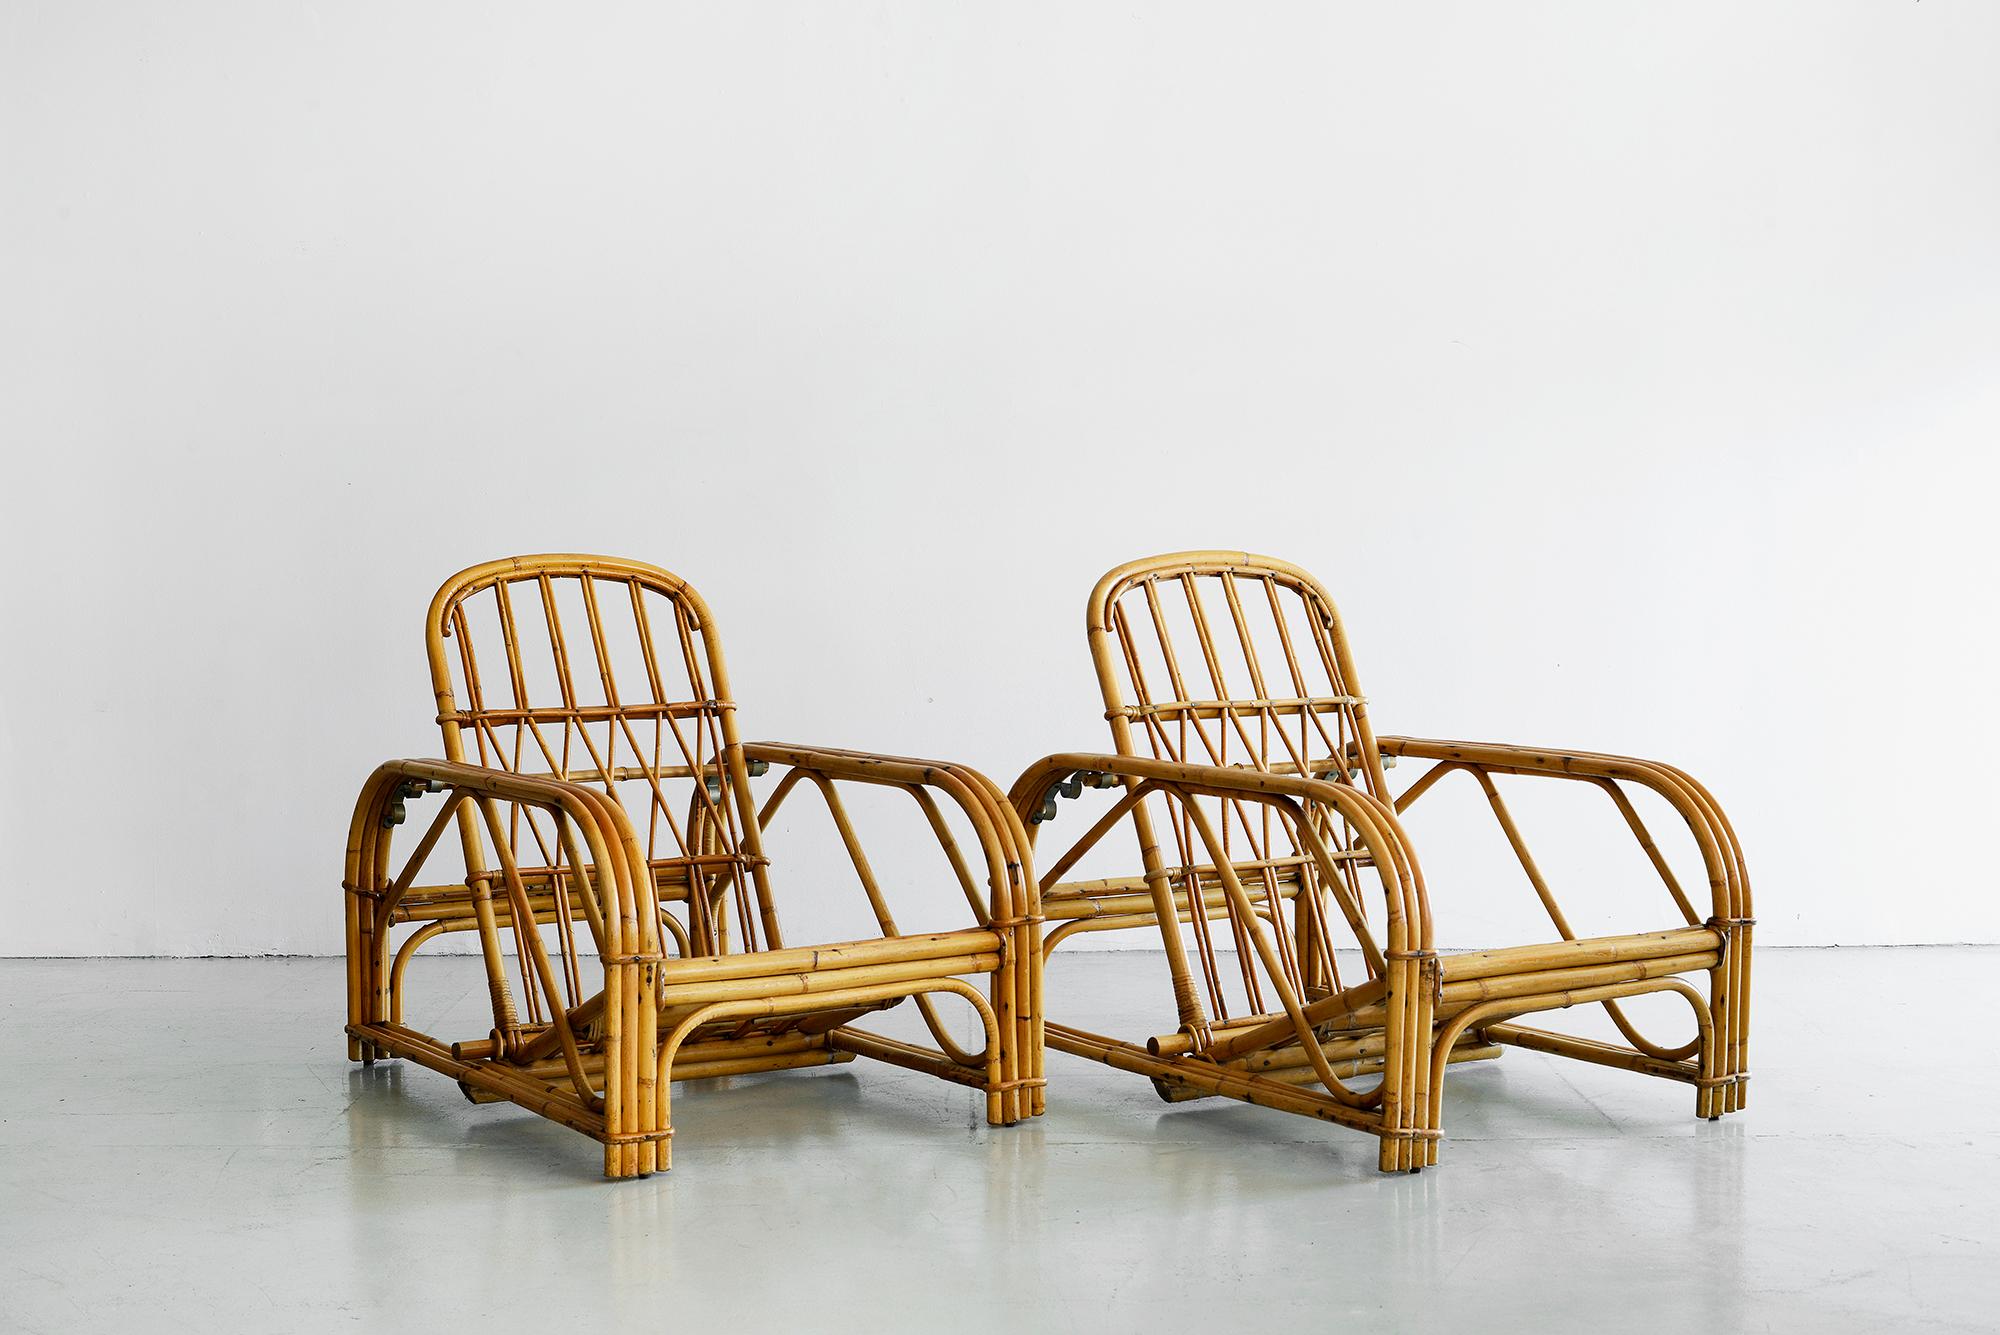 Rare pair of signed Audoux Minet rattan lounge chairs with ability to recline.
Original piece of bamboo lays between 3 brass rings that chooses your recline. 
Signature of brand on chairs. 
Cushions manufactured to customer's specification.